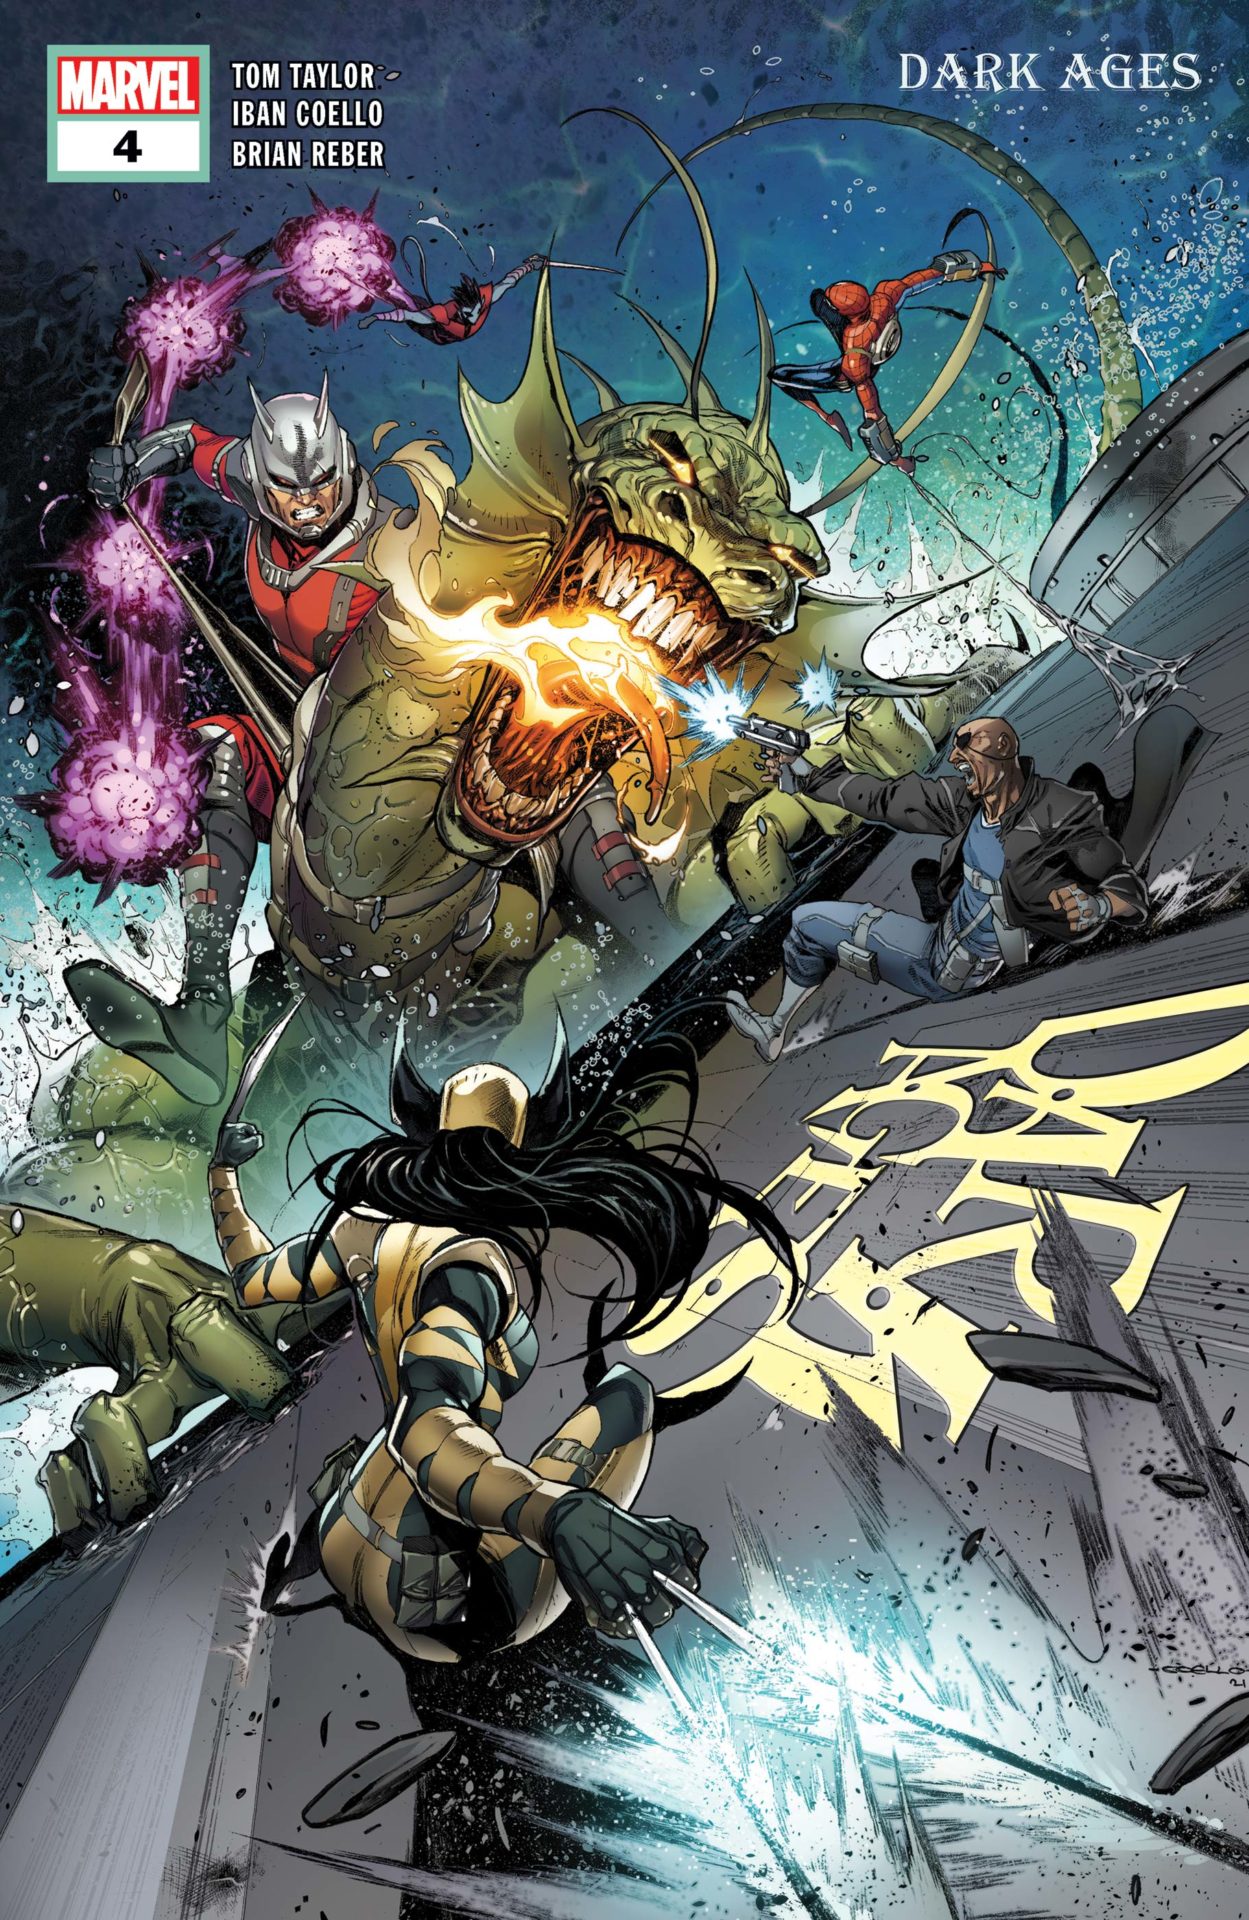 Ant-Man and Fin Fang Foom on the cover of Dark Ages #4